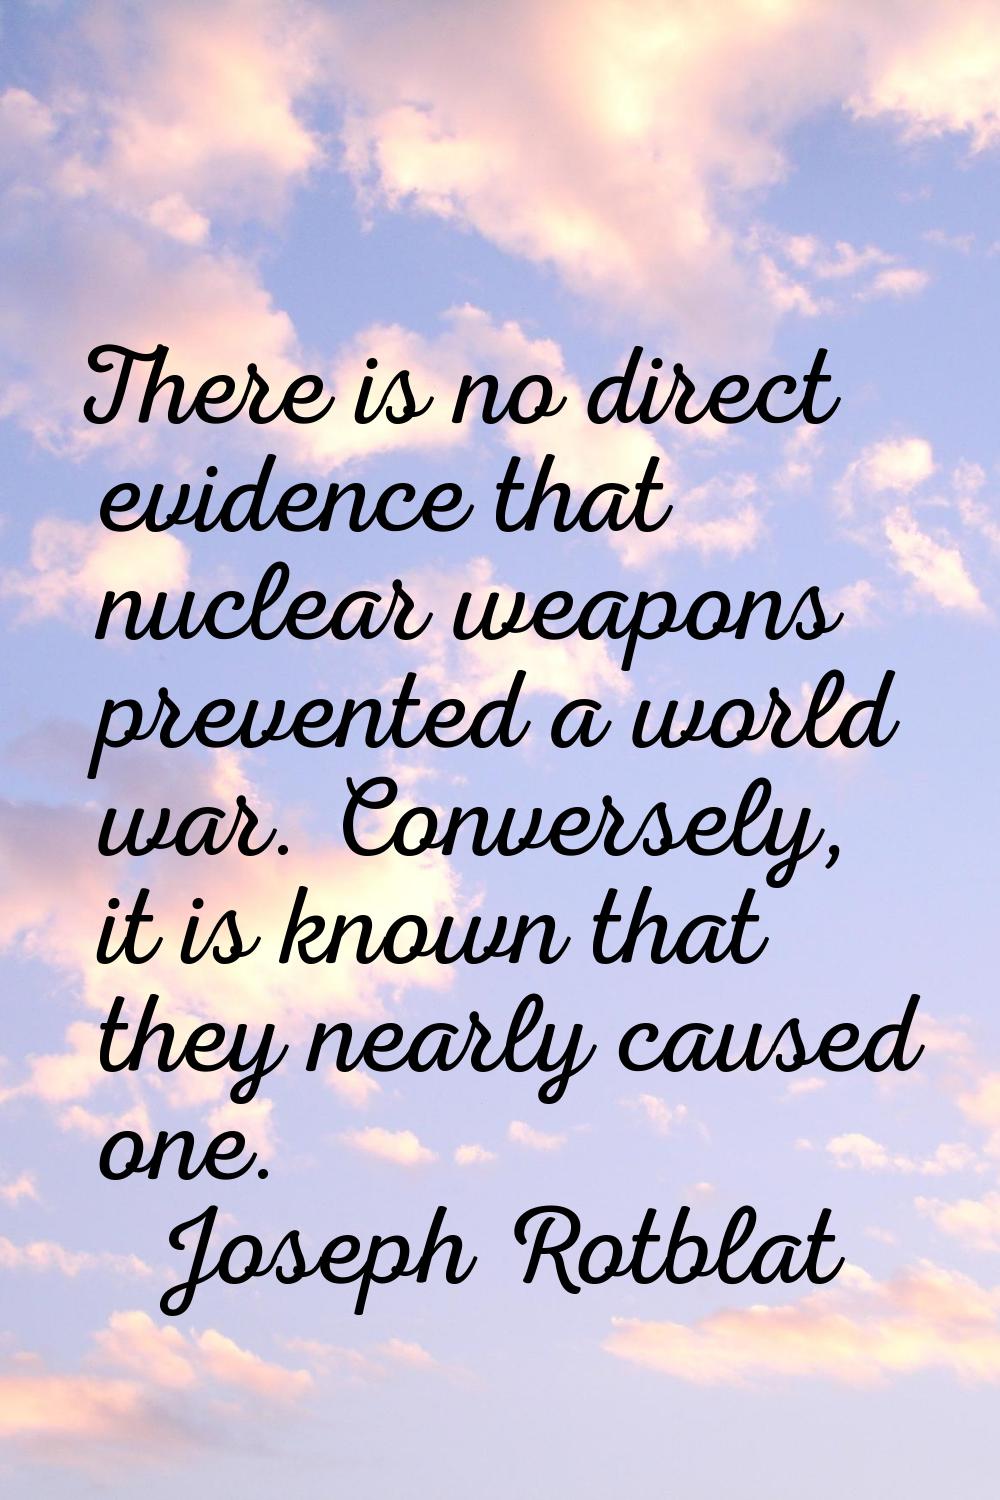 There is no direct evidence that nuclear weapons prevented a world war. Conversely, it is known tha